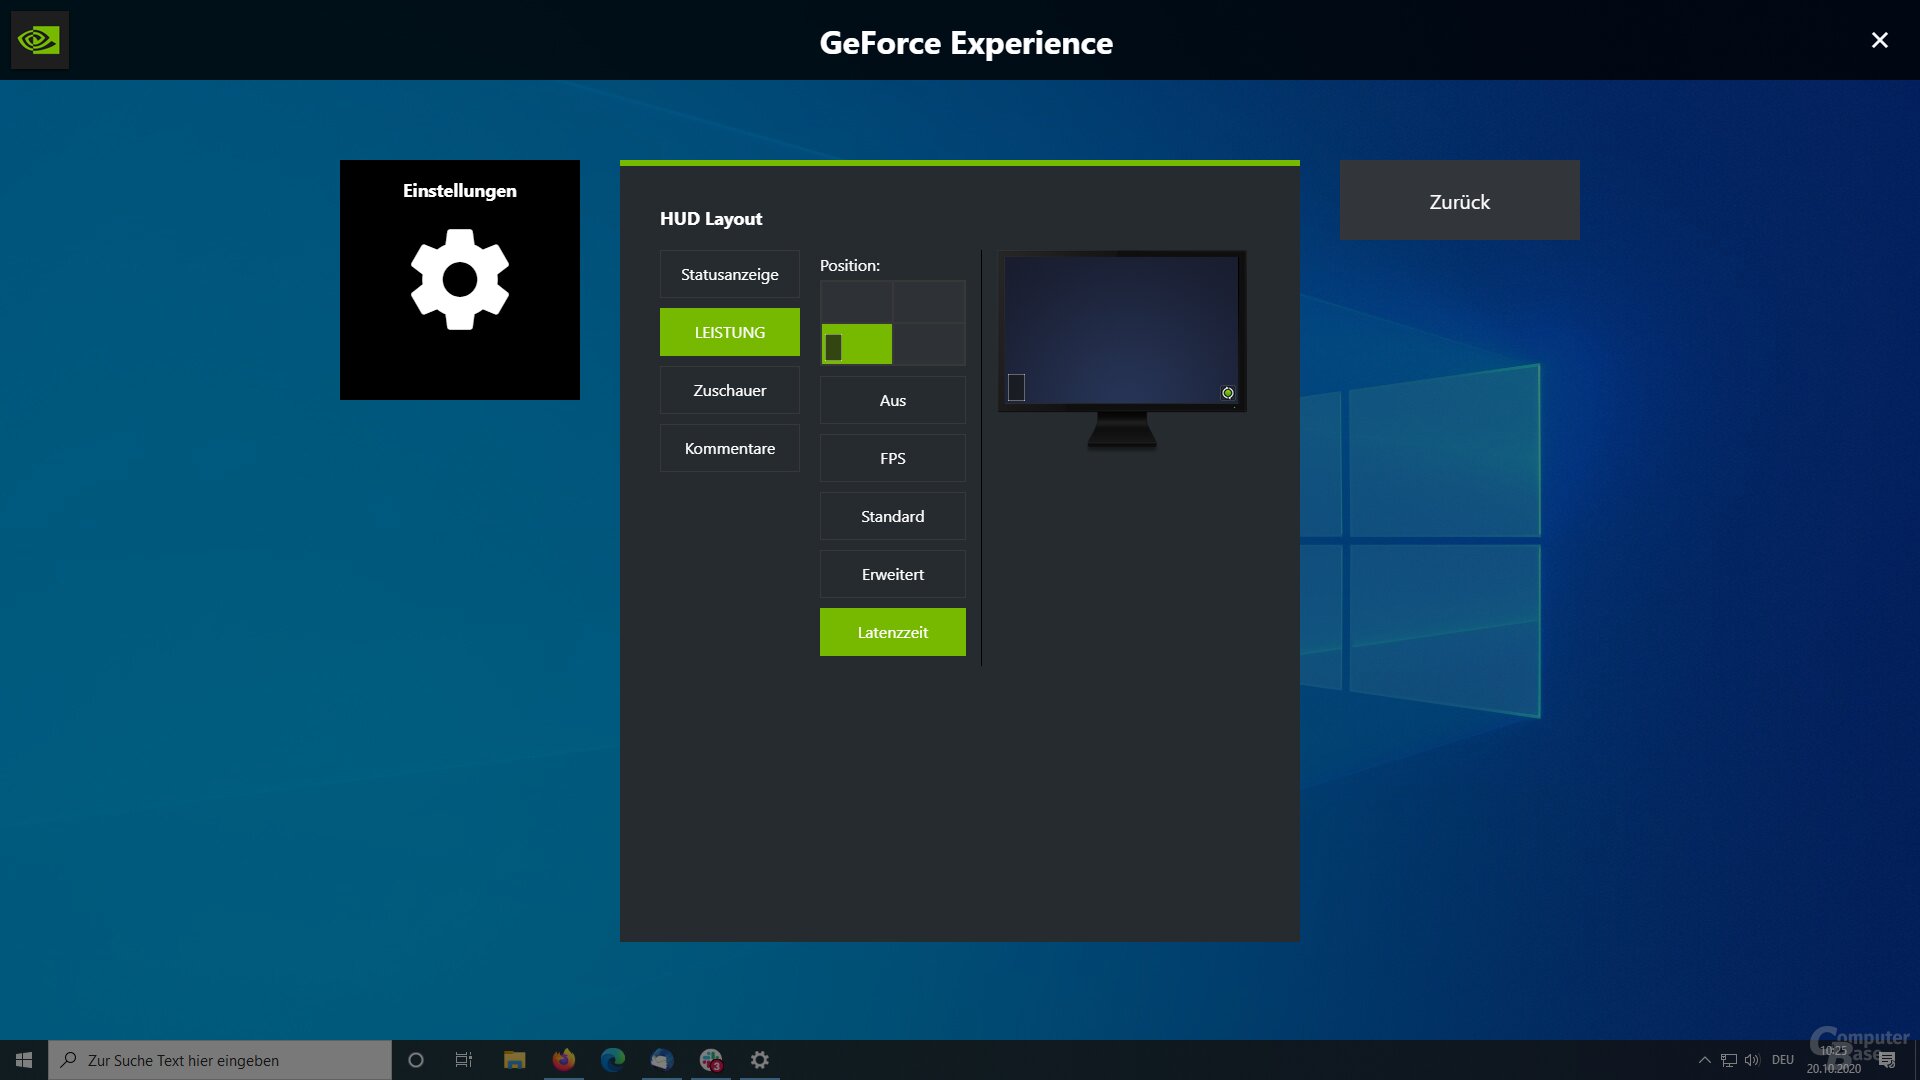 The new latency overlay for GeForce Experience